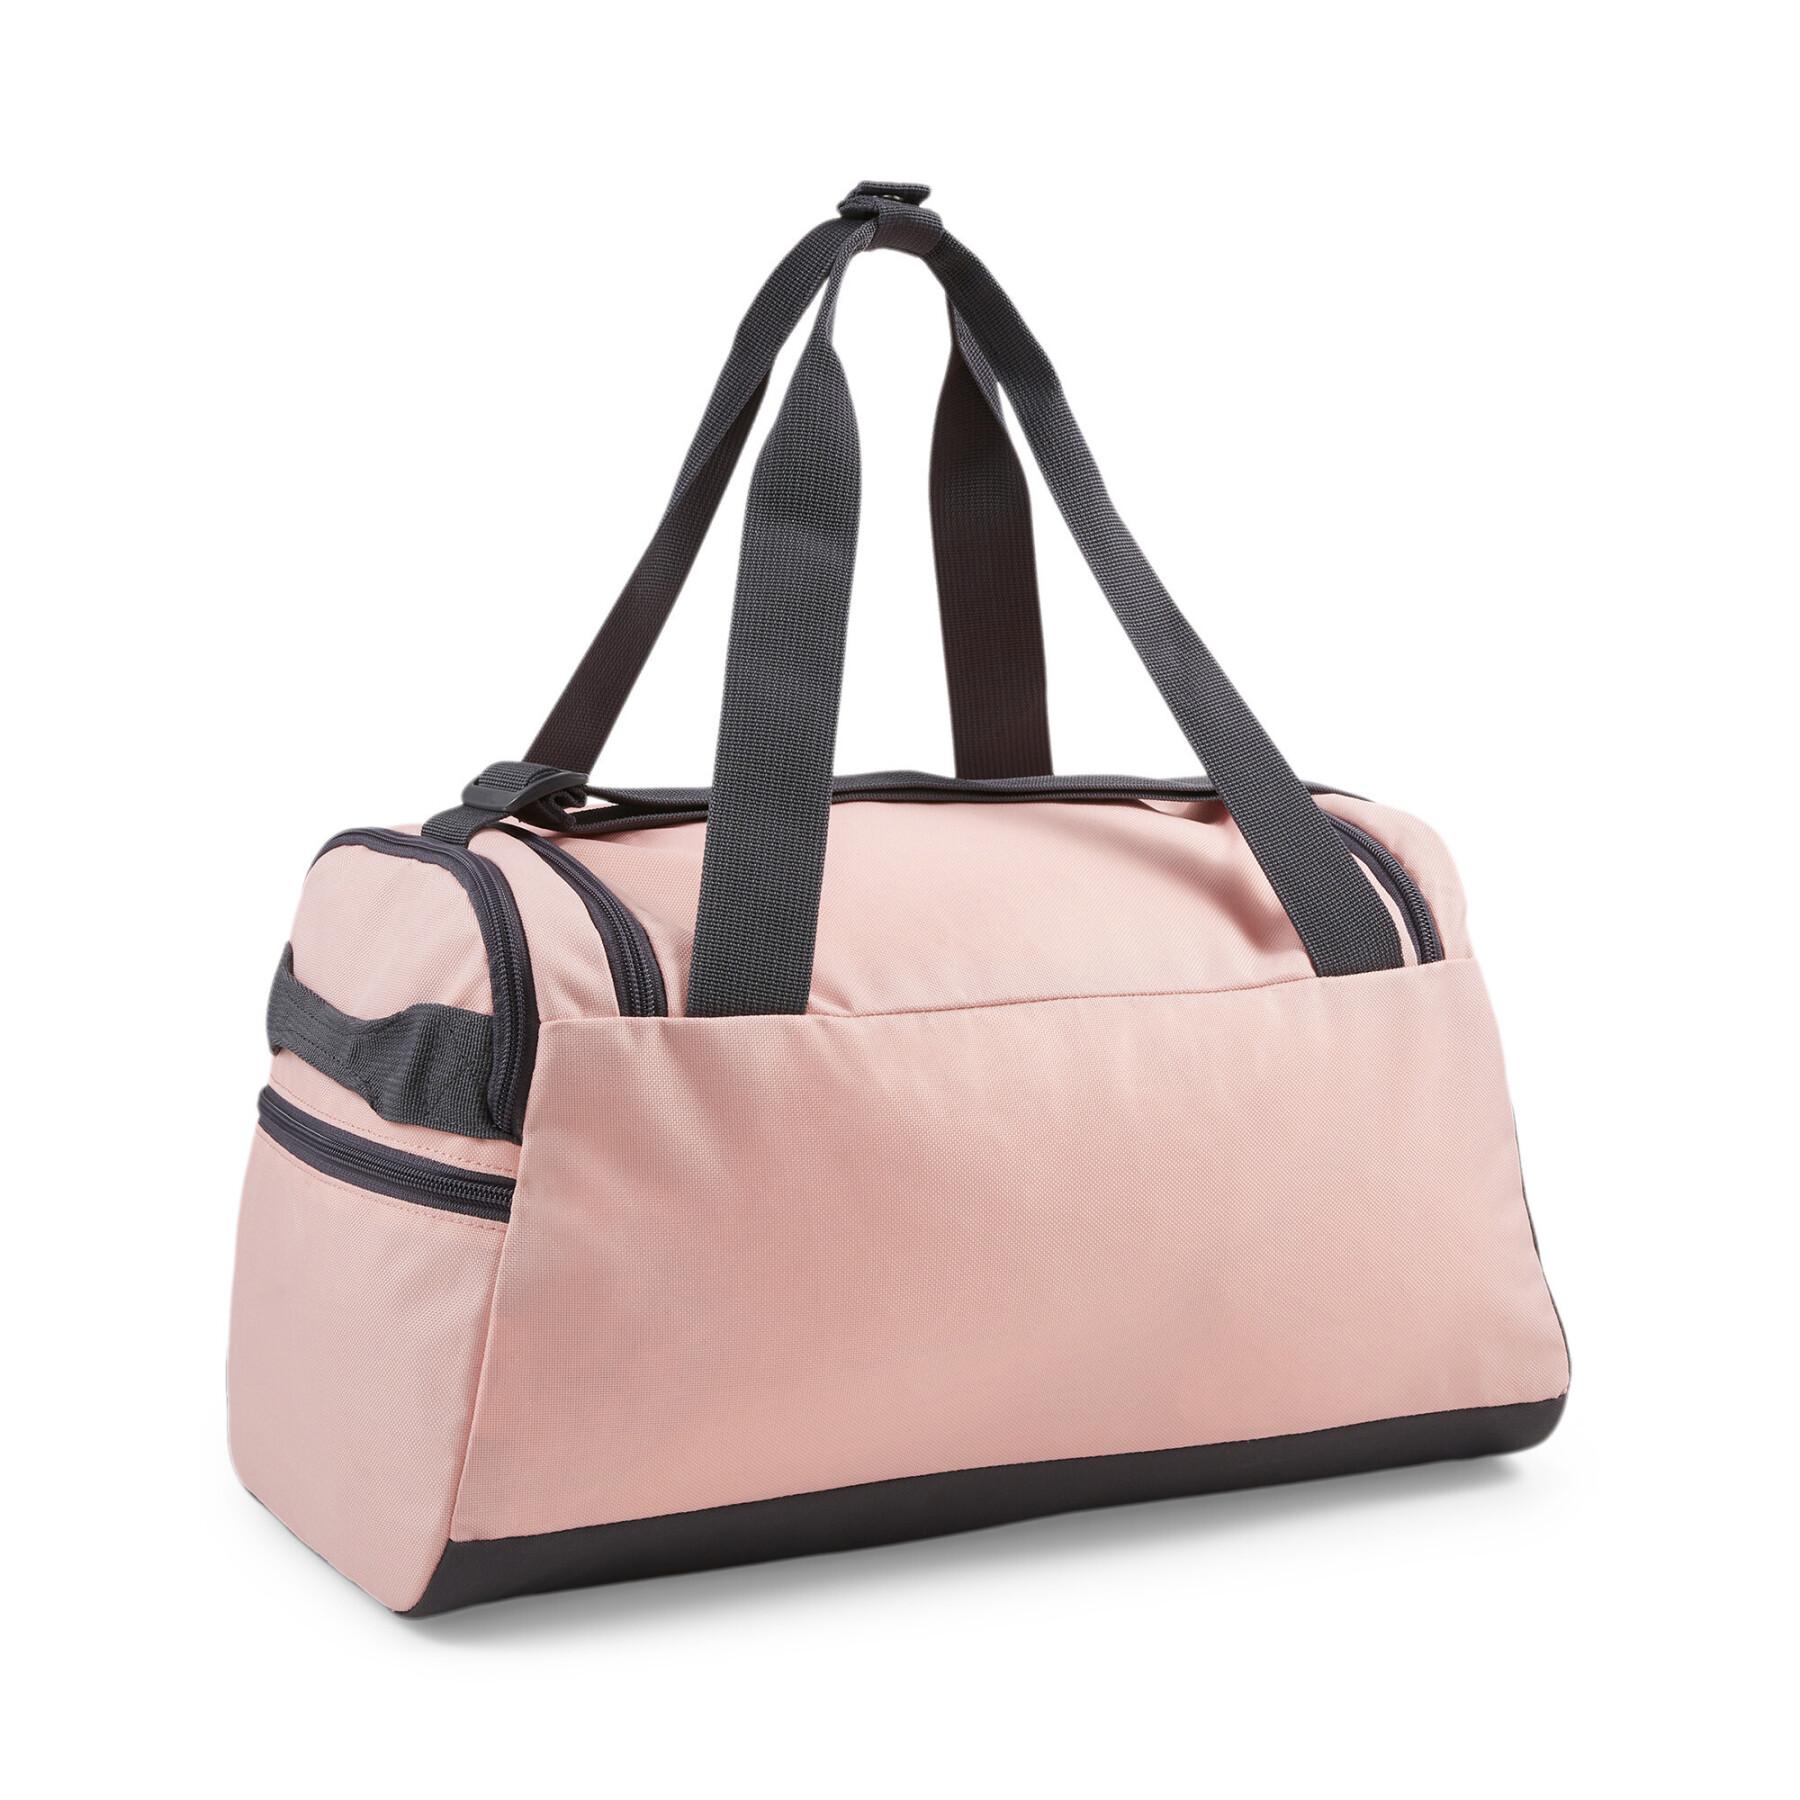 Challenger Extra Small Duffel Bag